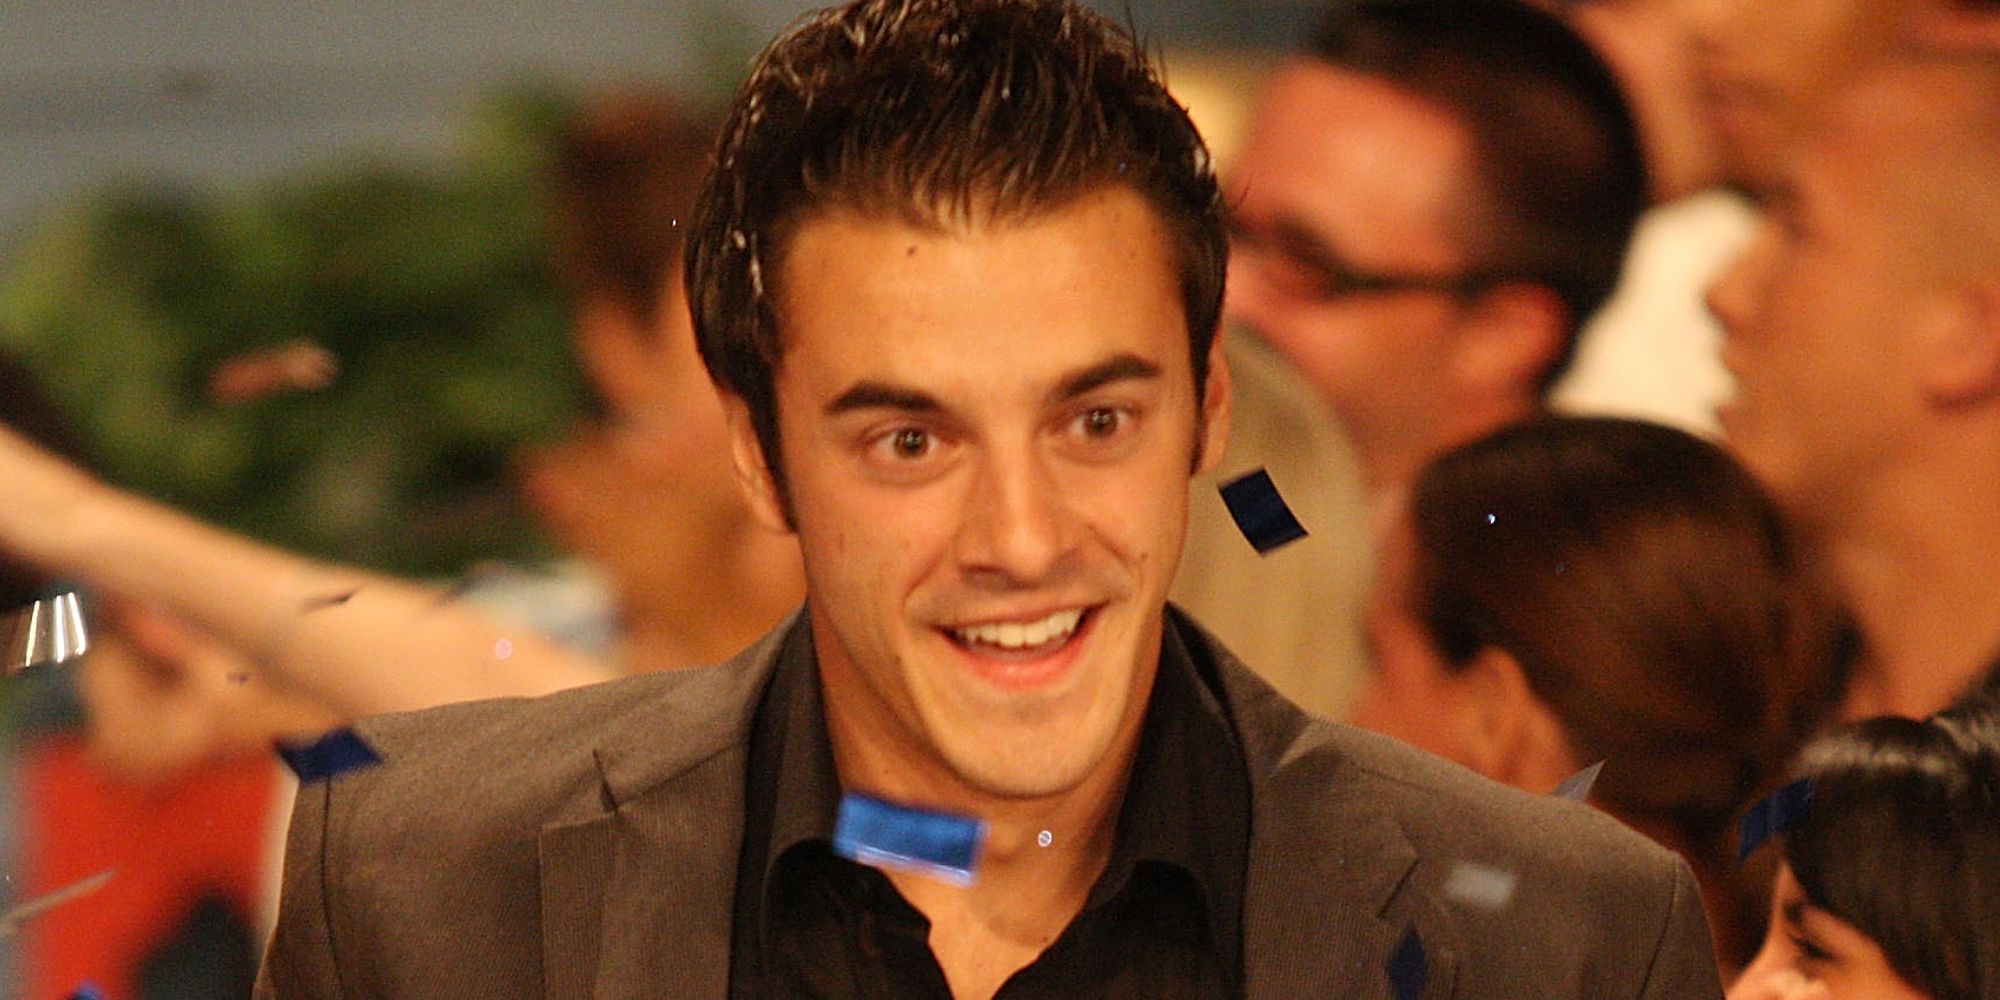 Dan Gheesling on the finale of Big Brother, smiling.